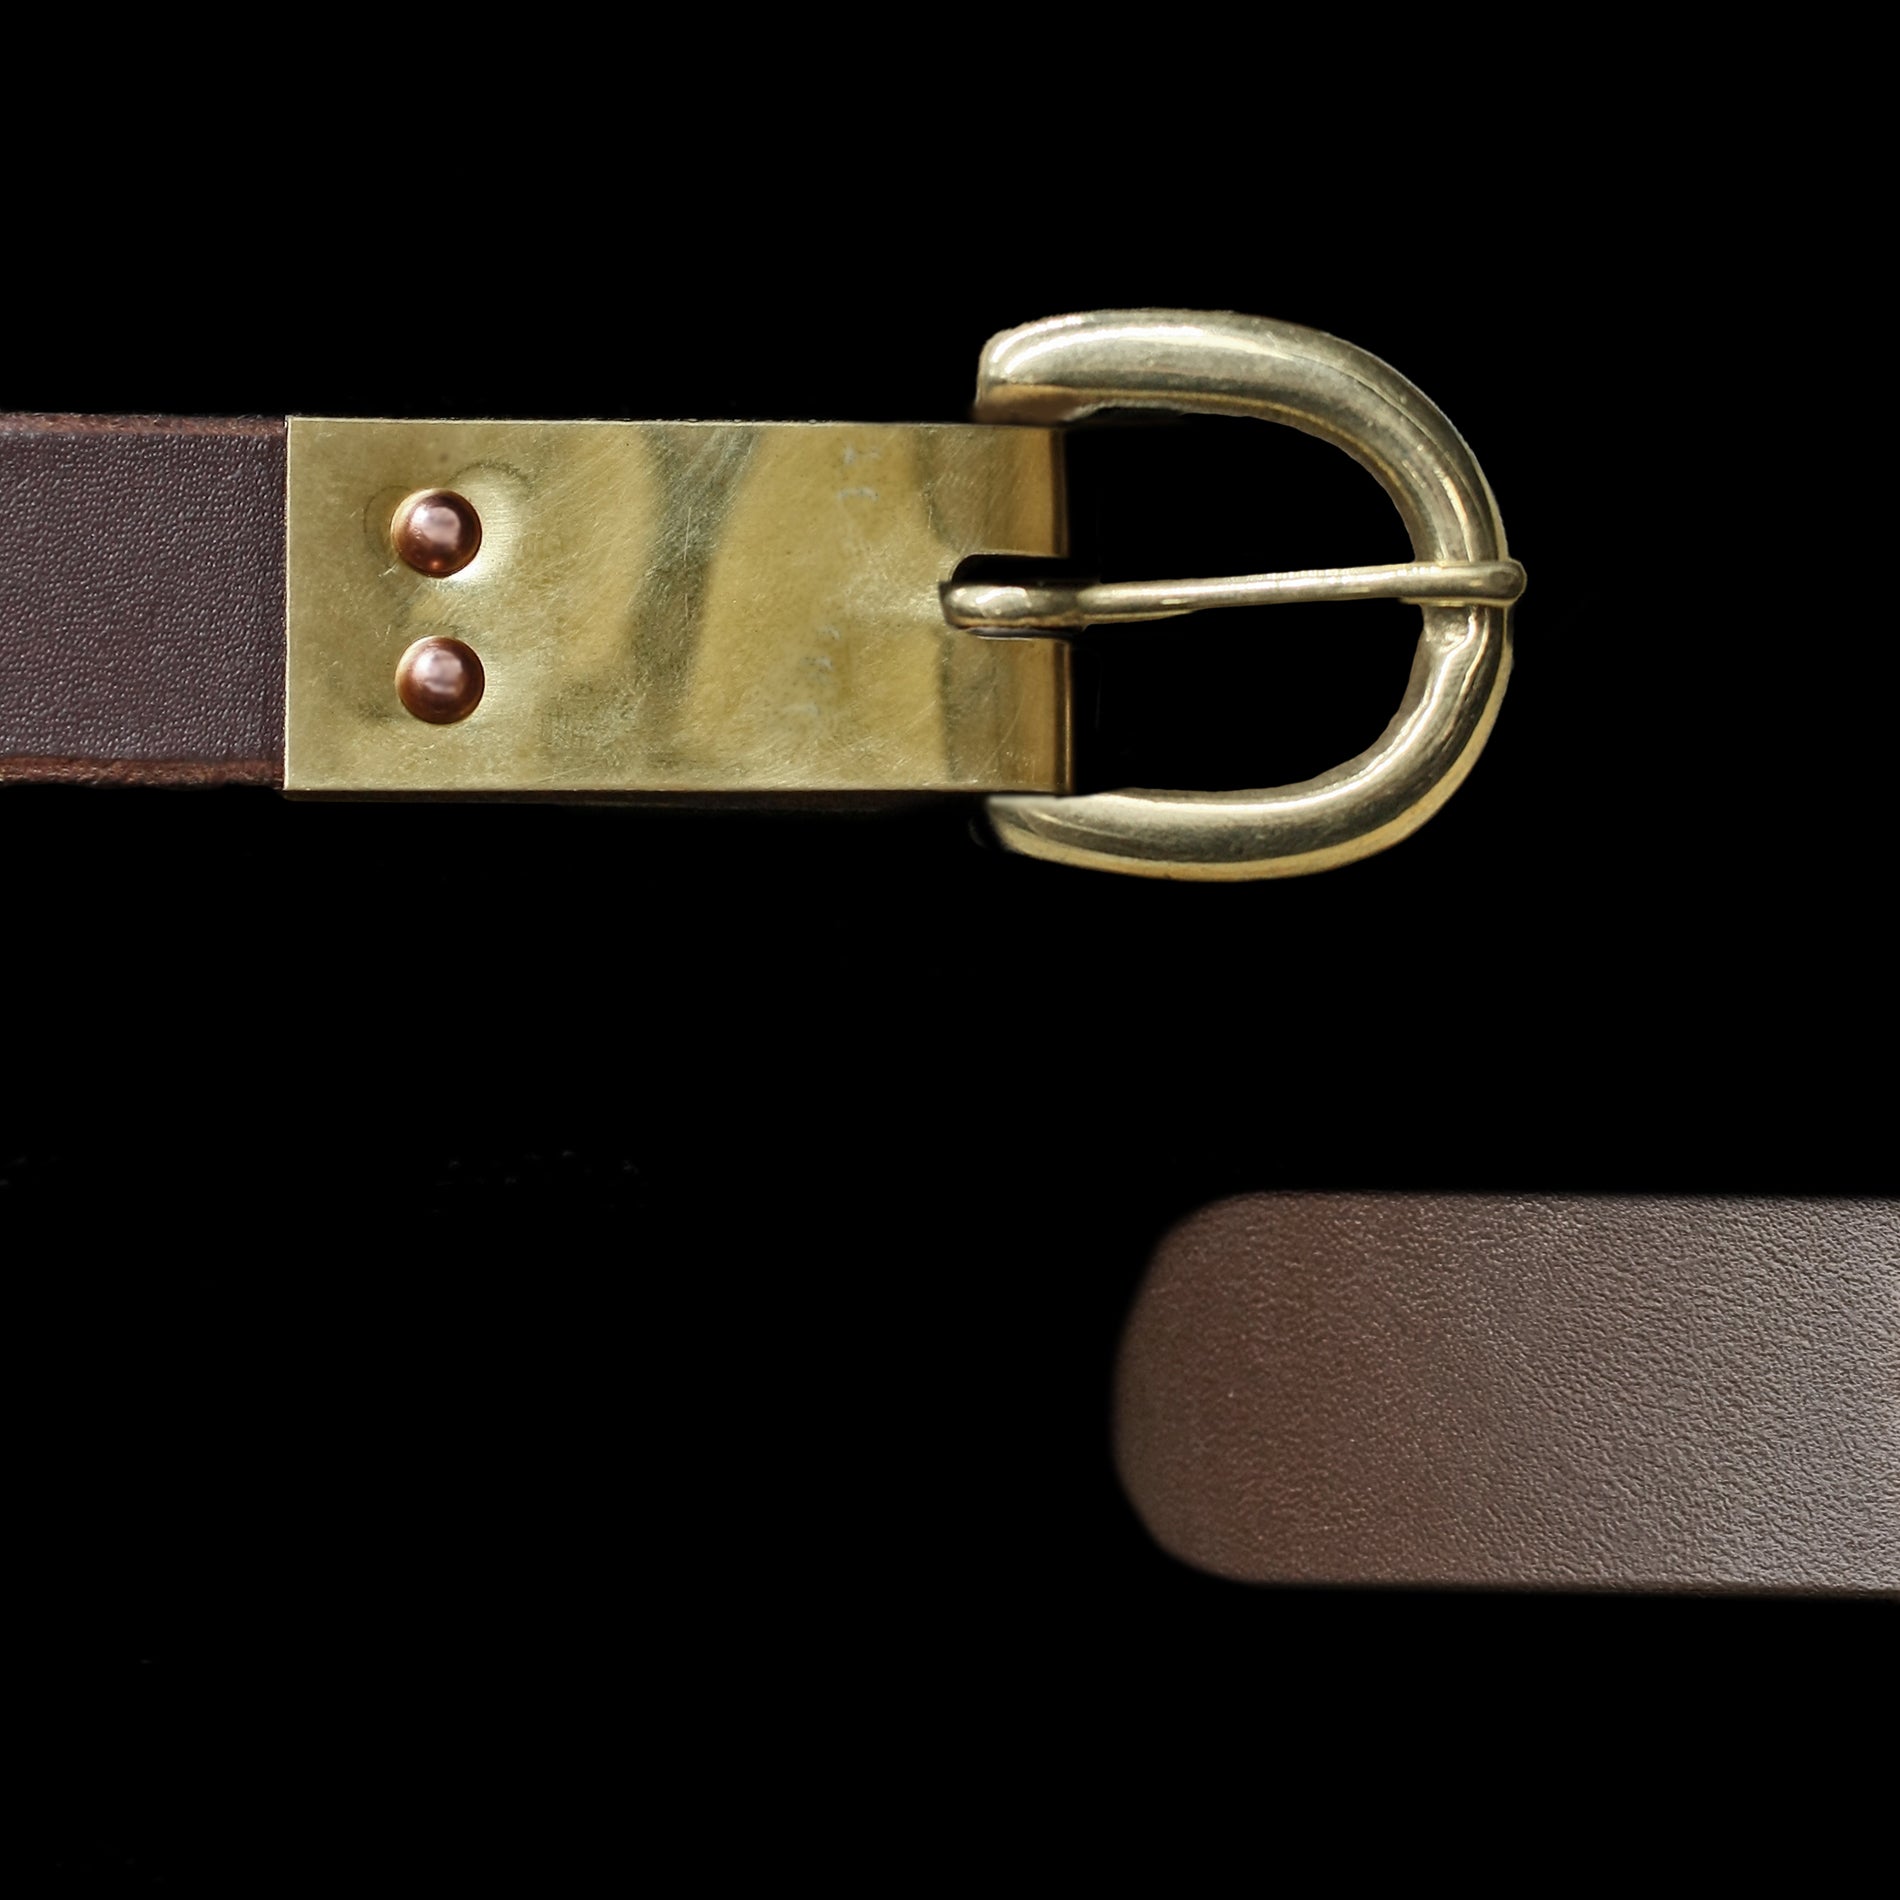 Custom Made 25mm (1 inch) Wide Leather Viking Belt with Brass Buckle